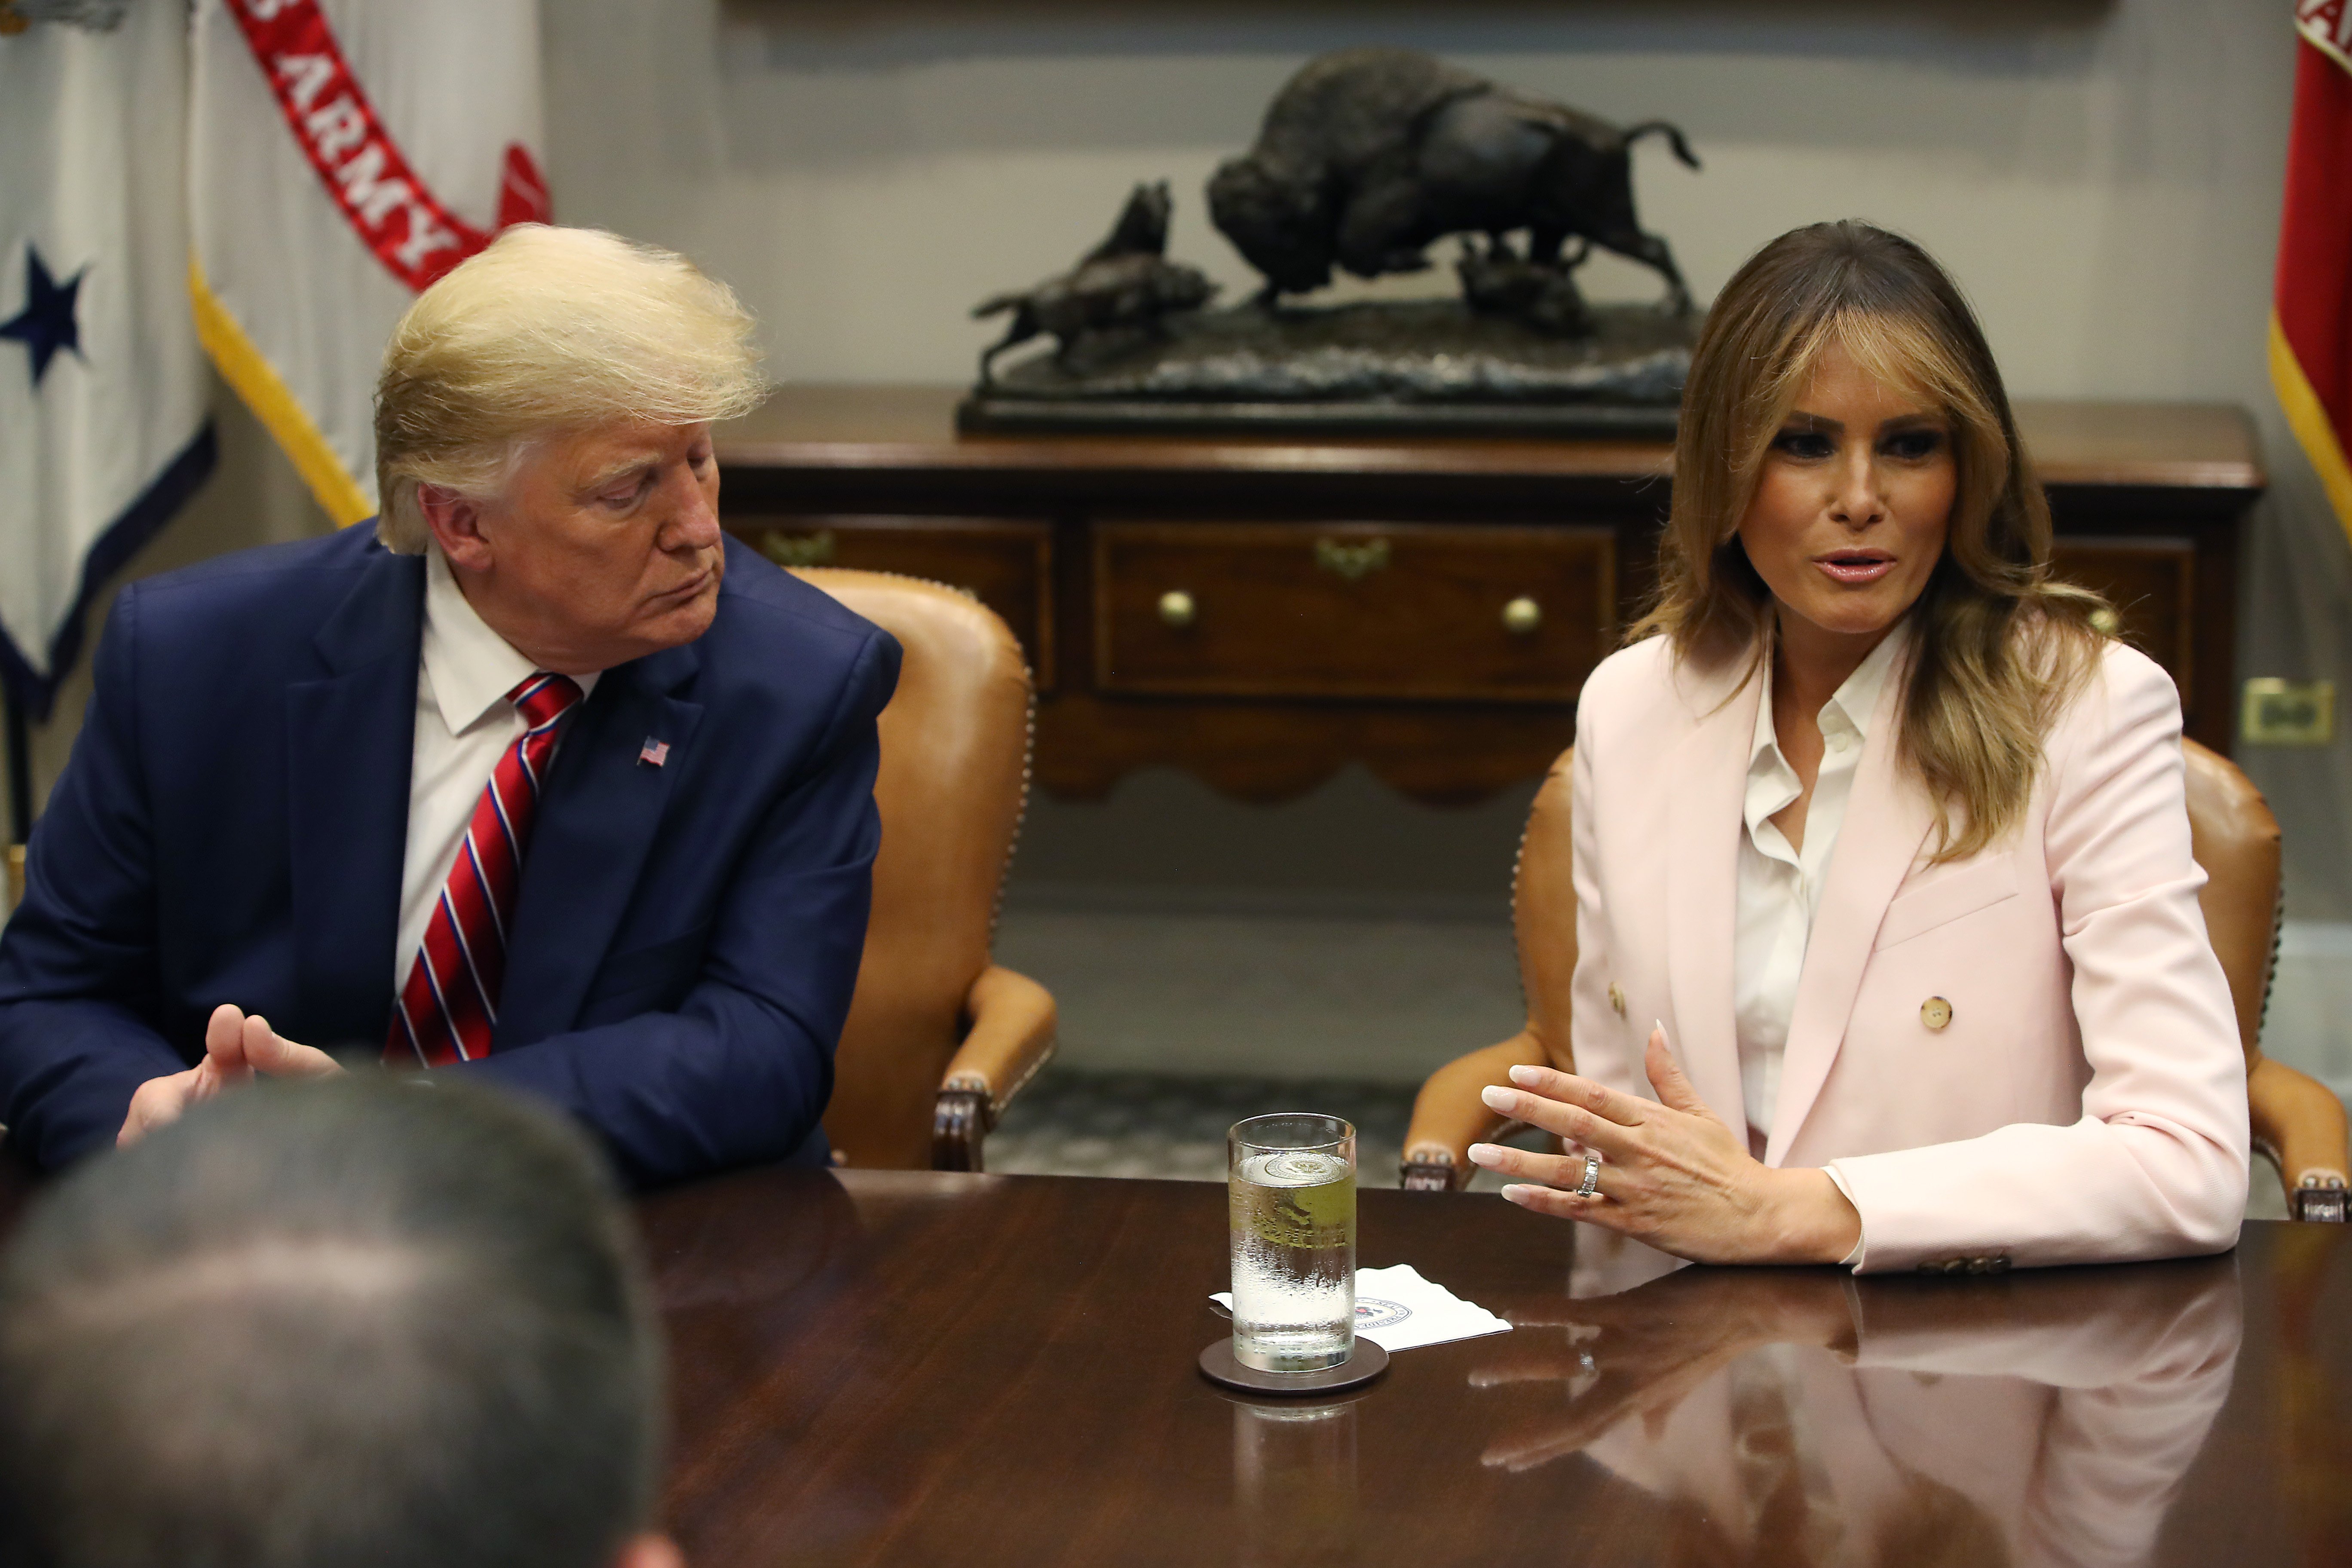 Donald and Melania Trump during a roundtable discussion on the efforts to combat the opioid epidemic, in the Roosevelt Room | Photo: Getty Images